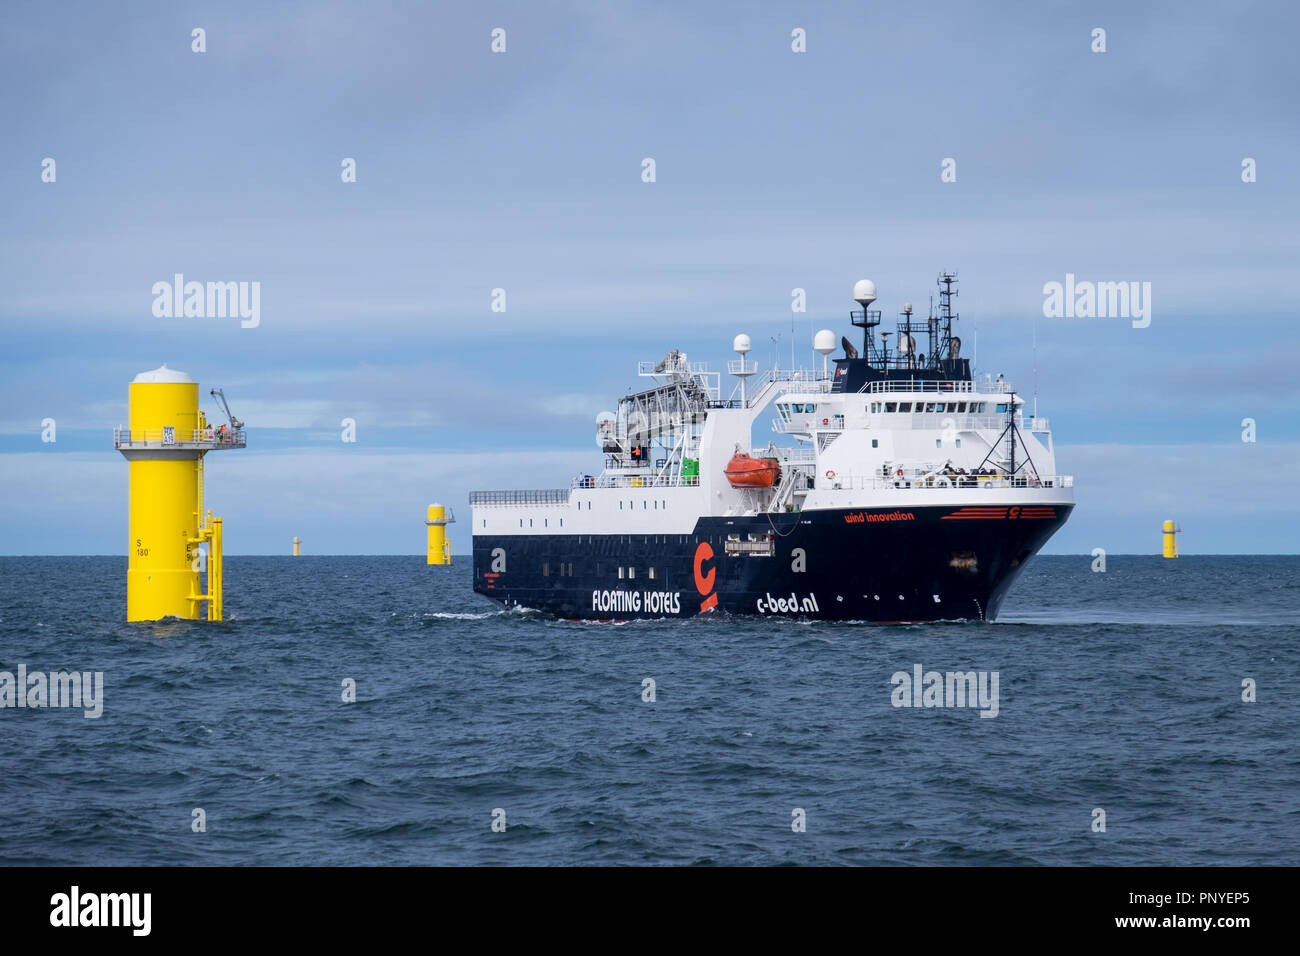 The floating hotel ship, Wind Innovation, working on Hornsea Project One Offshore Wind Farm. Stock Photo